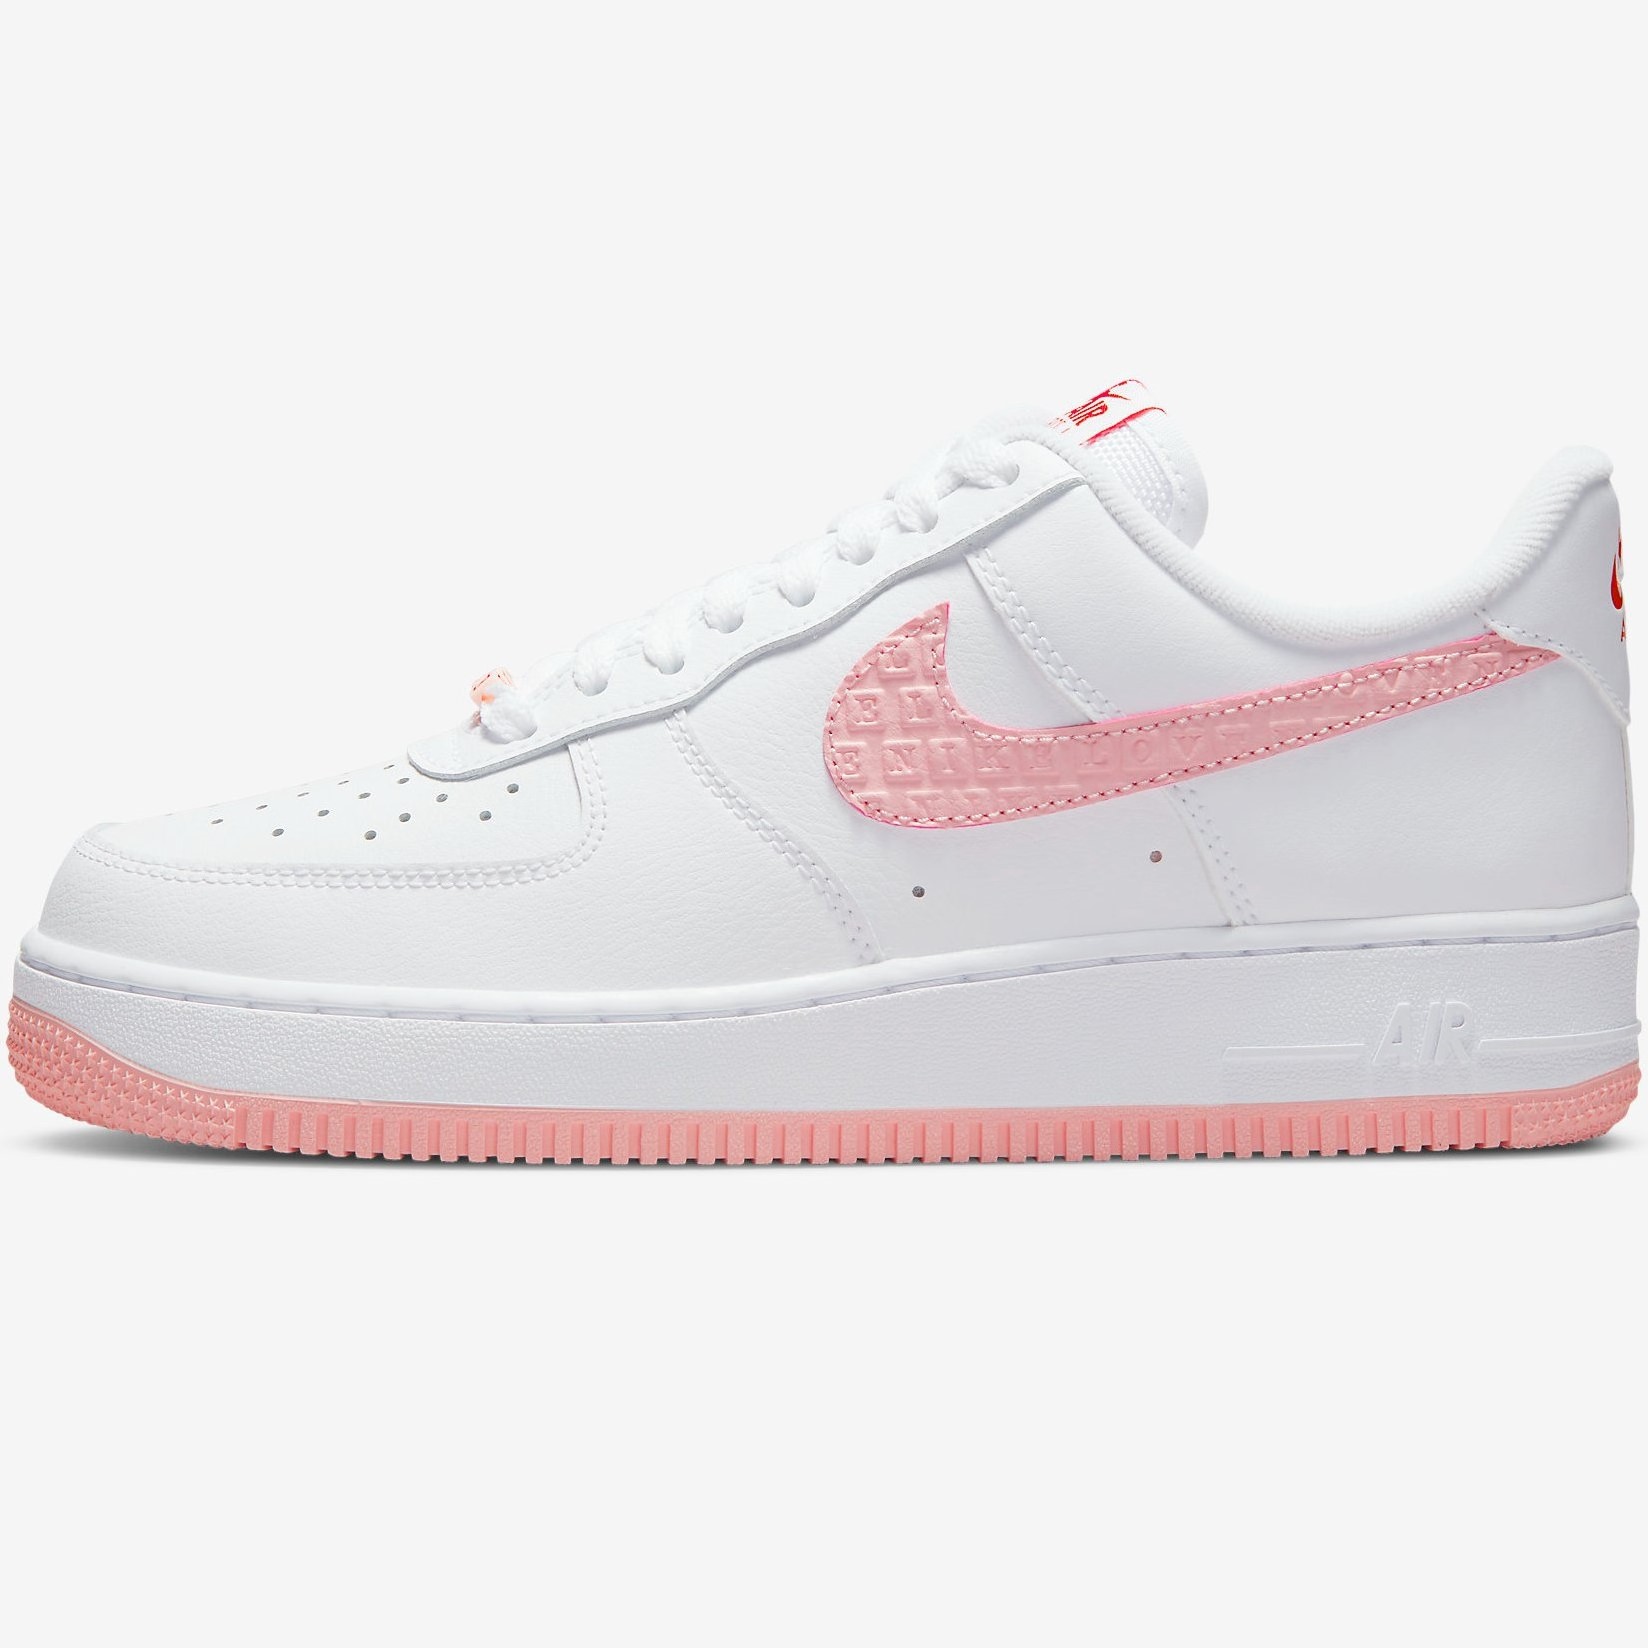 GIÀY THỂ THAO NỮ NIKE AIR FORCE 1 07 LOW VD VALENTINE´S DAY WHITE ATMOSPHERE UNIVERSITY RED SAIL DQ9320-100 12